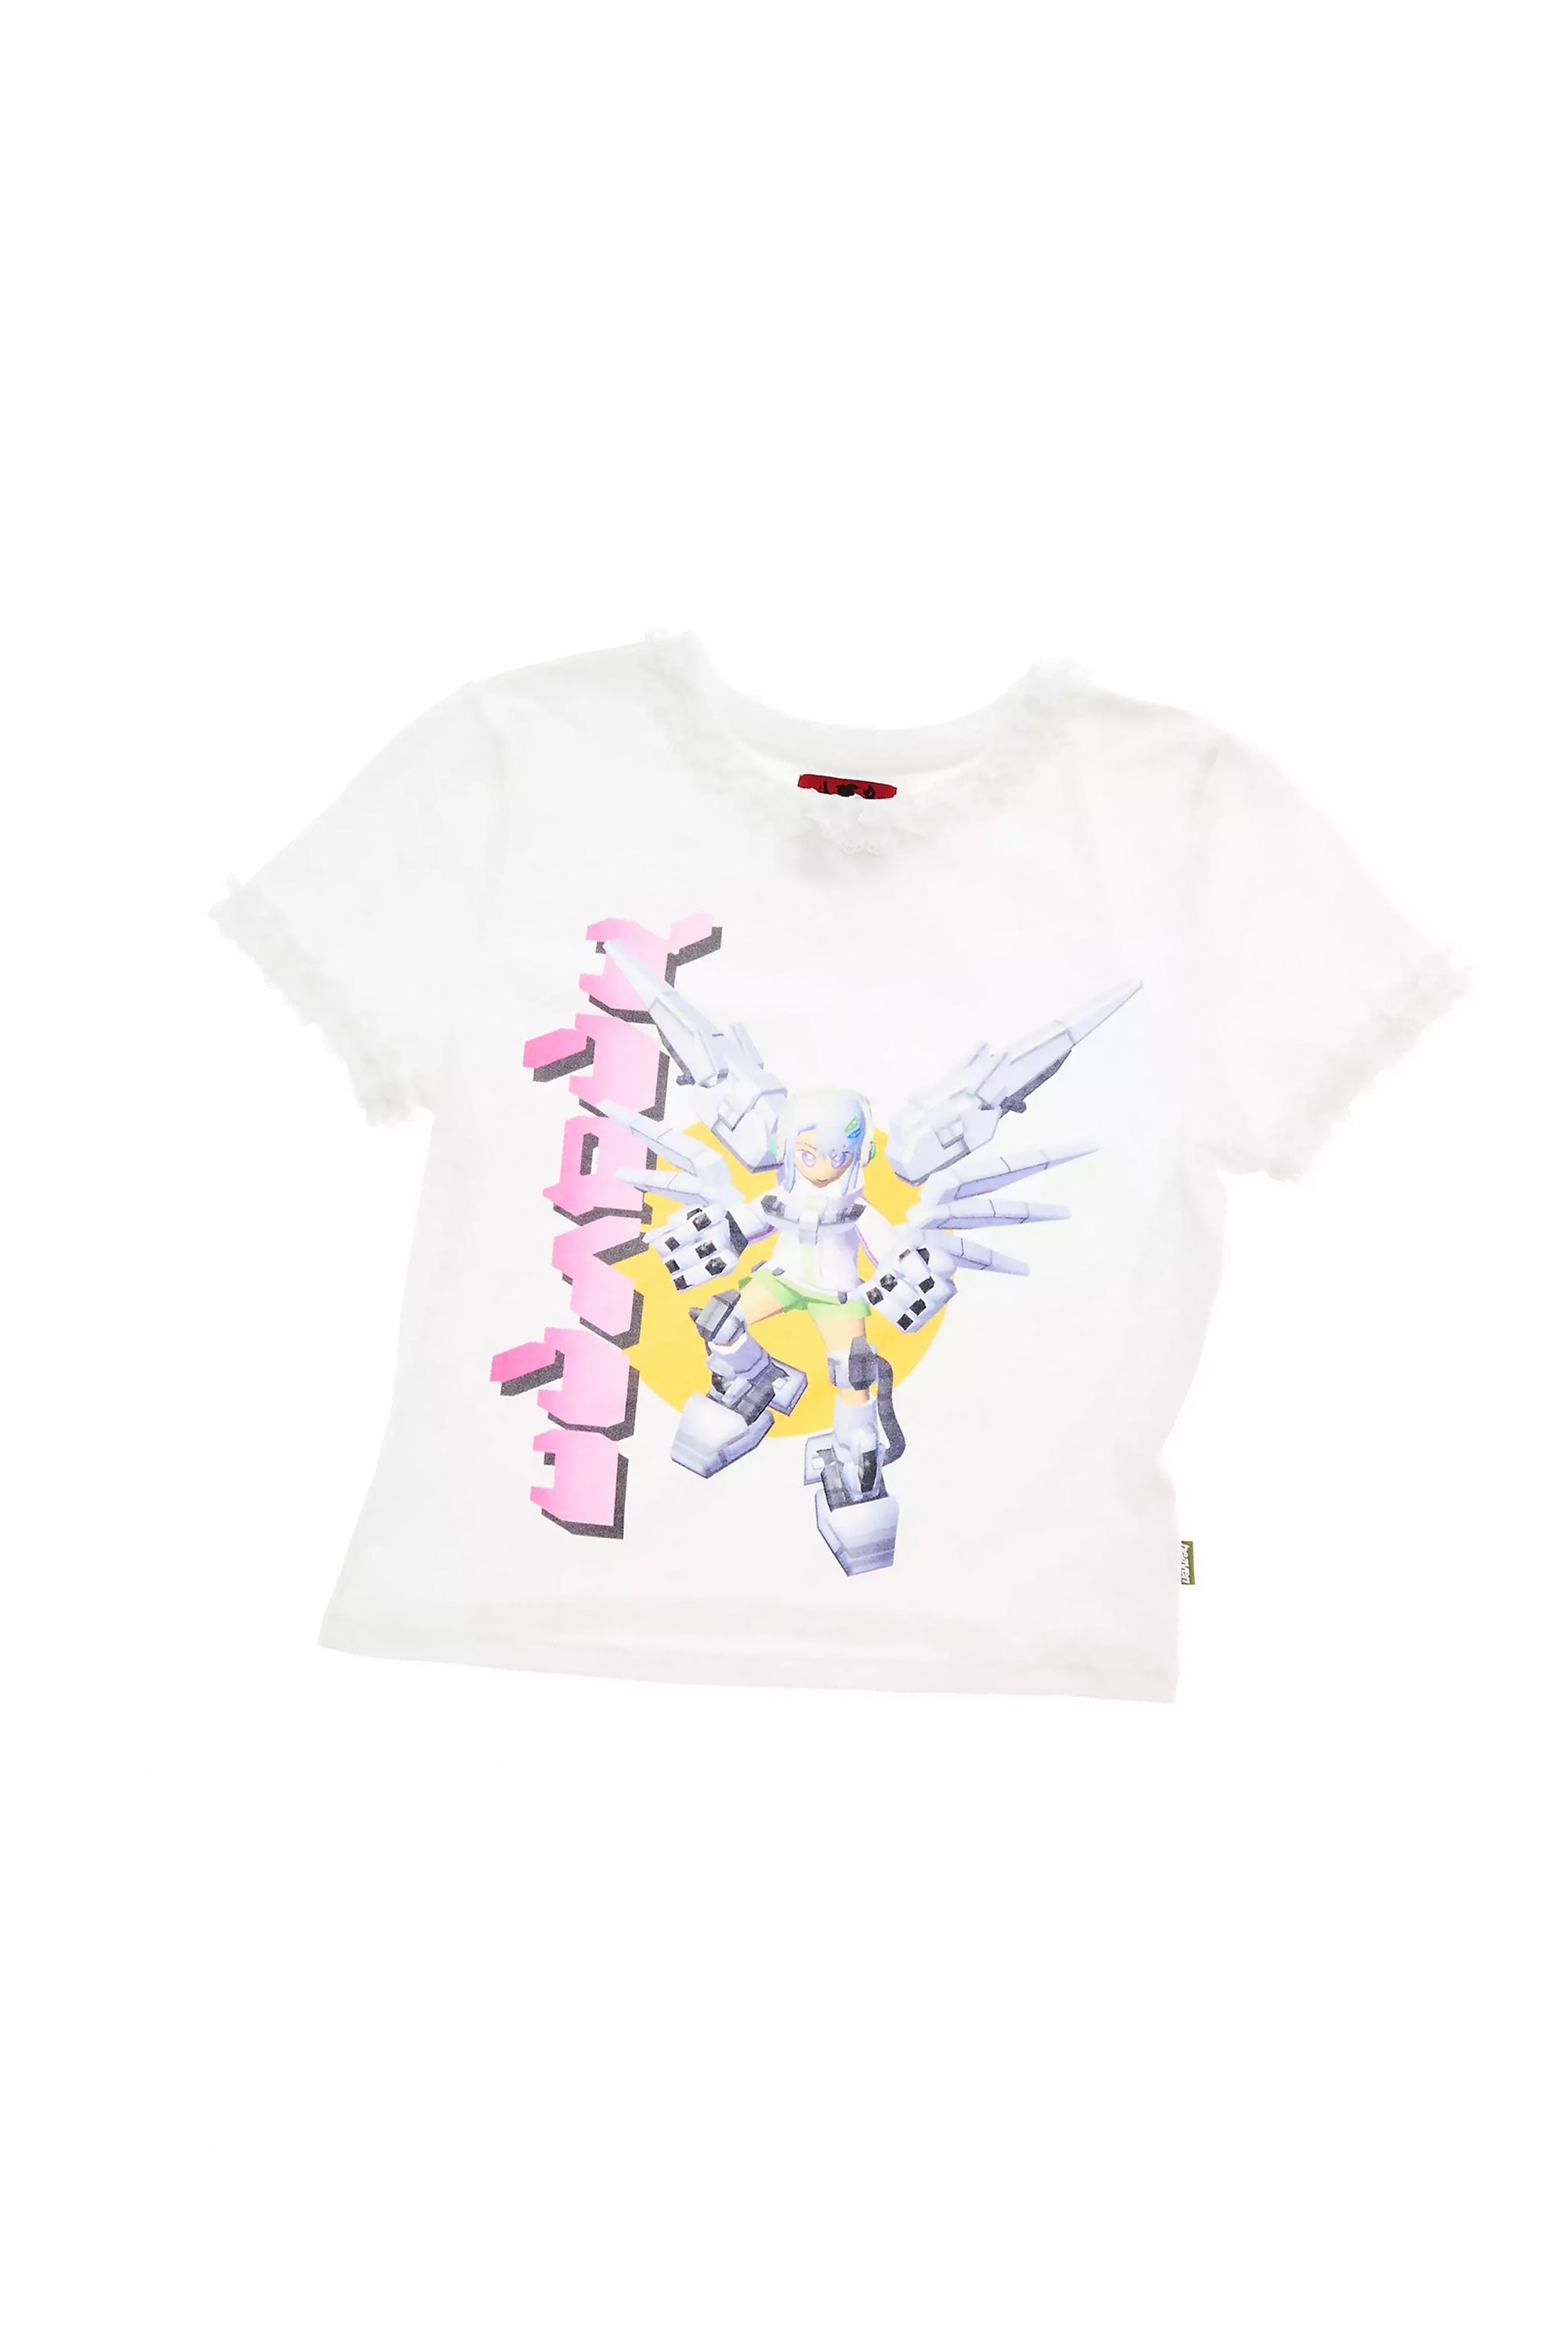 The HEAVEN - ROBOT LACE BABY TEE  available online with global shipping, and in PAM Stores Melbourne and Sydney.